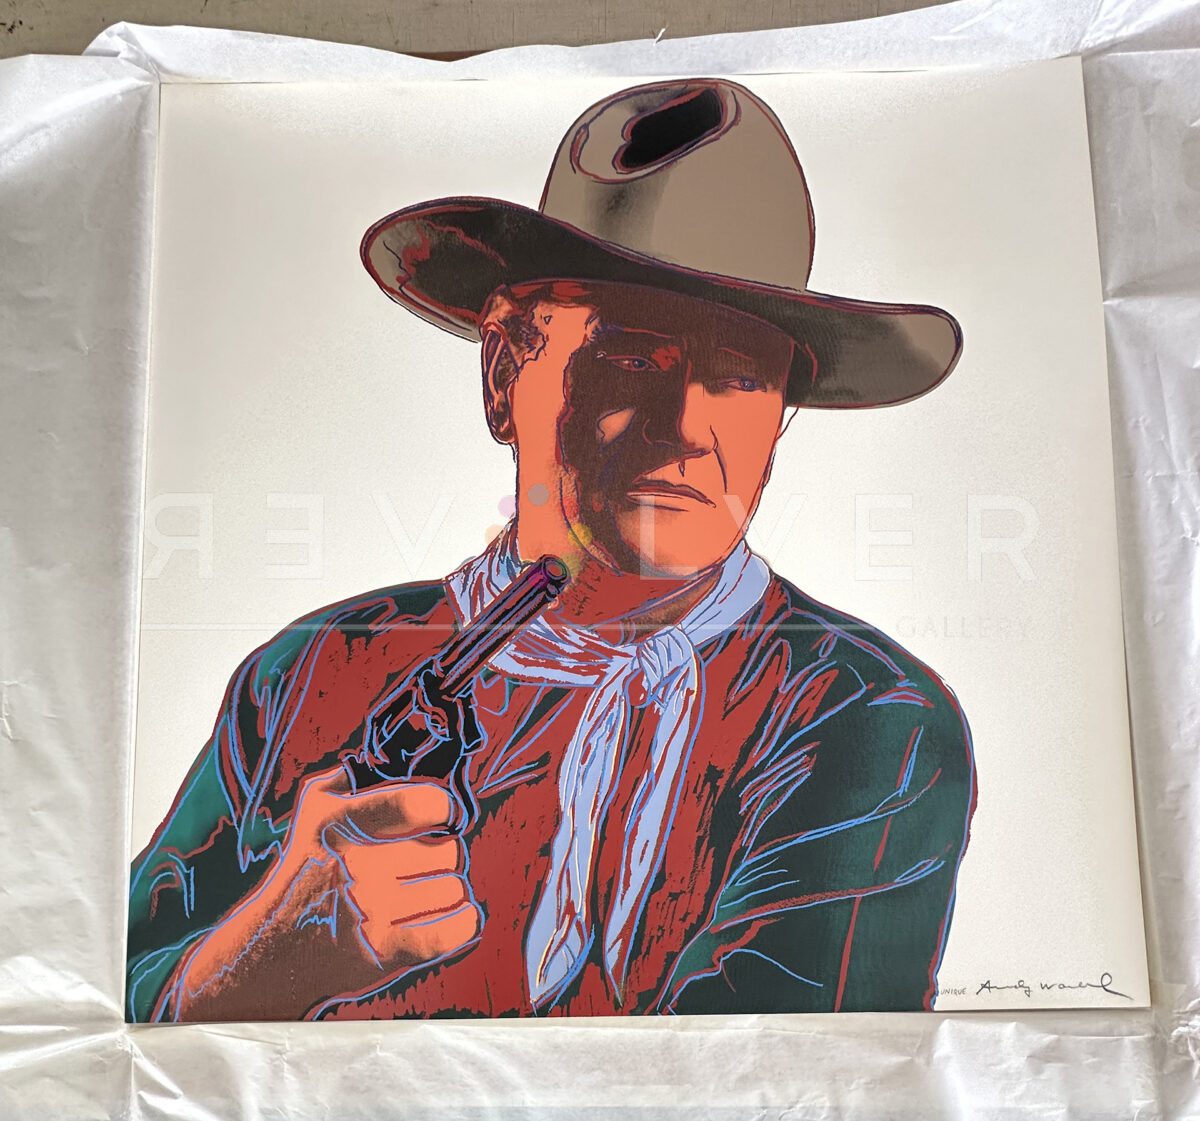 John Wayne (Unique) by Andy Warhol outside of a frame